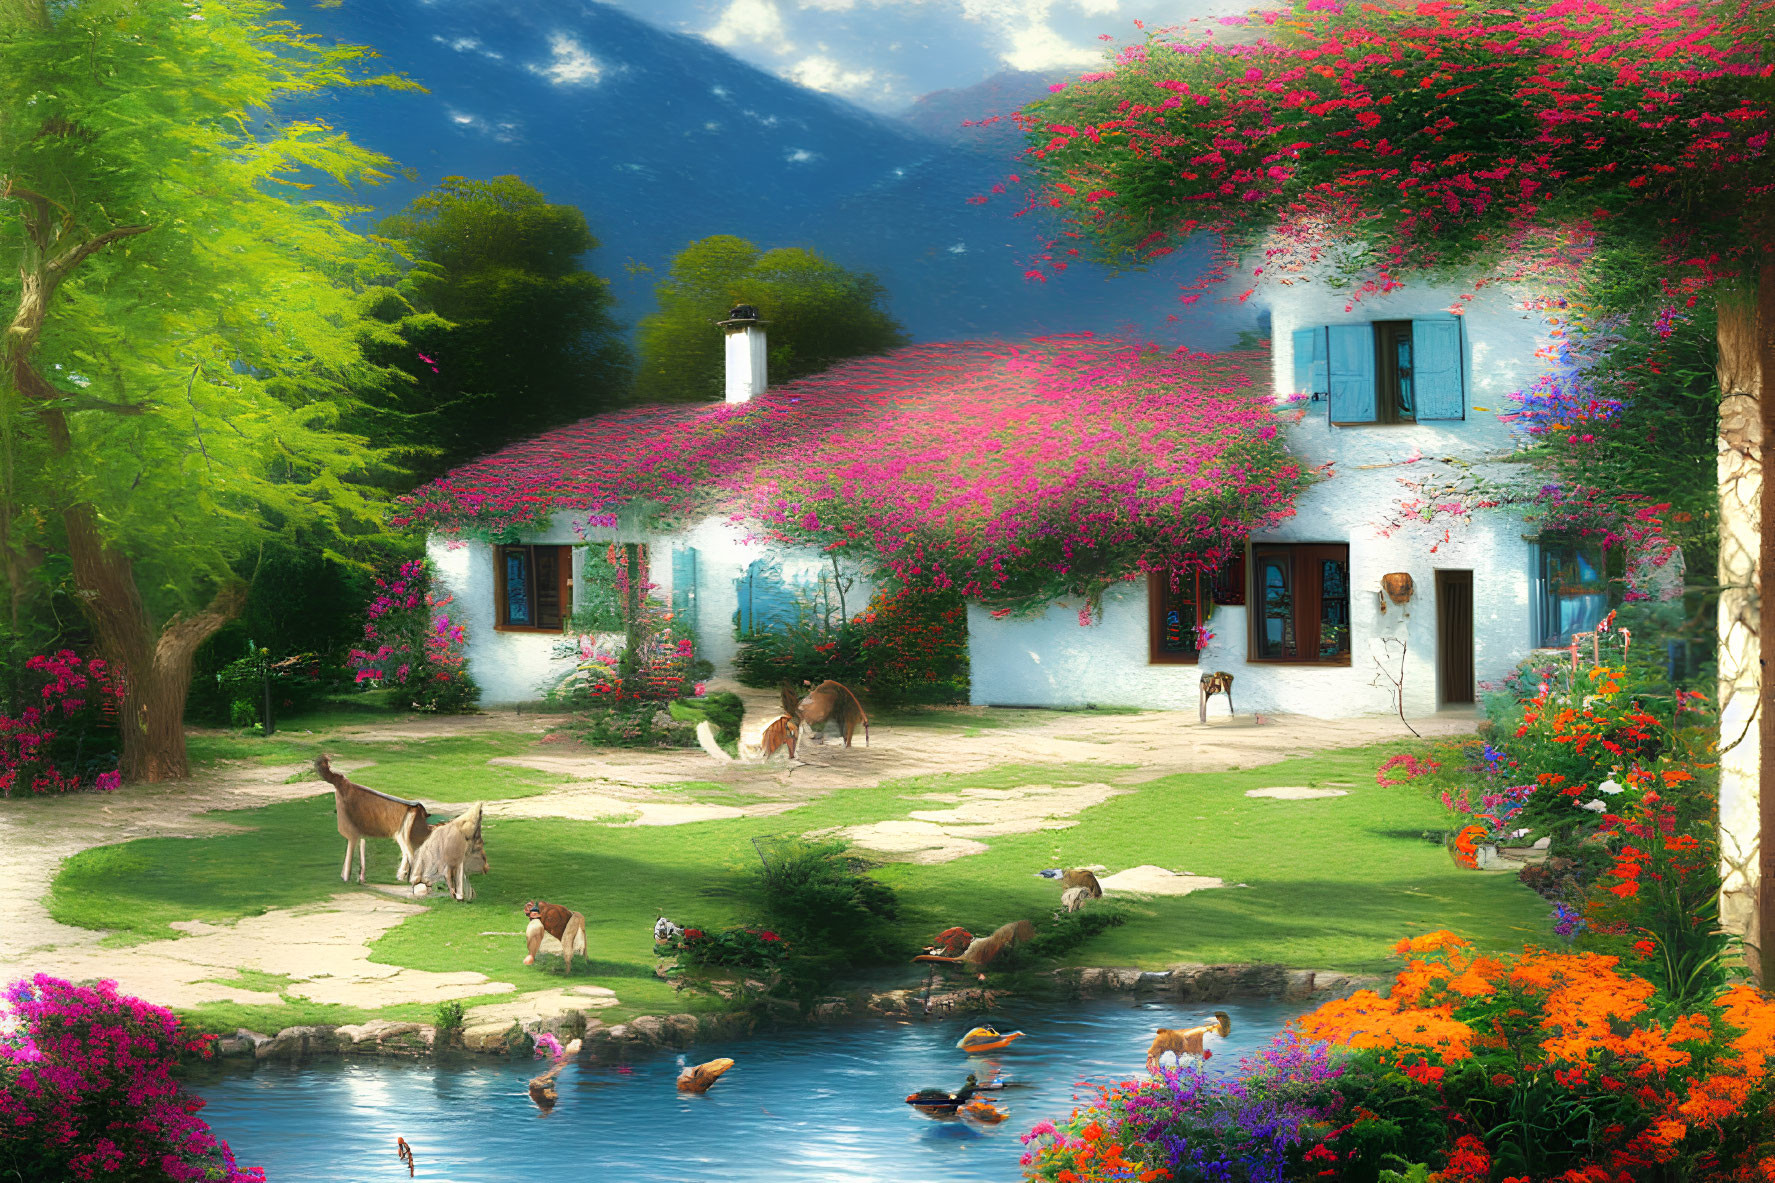 Scenic cottage with gardens, pond, ducks, and mountains